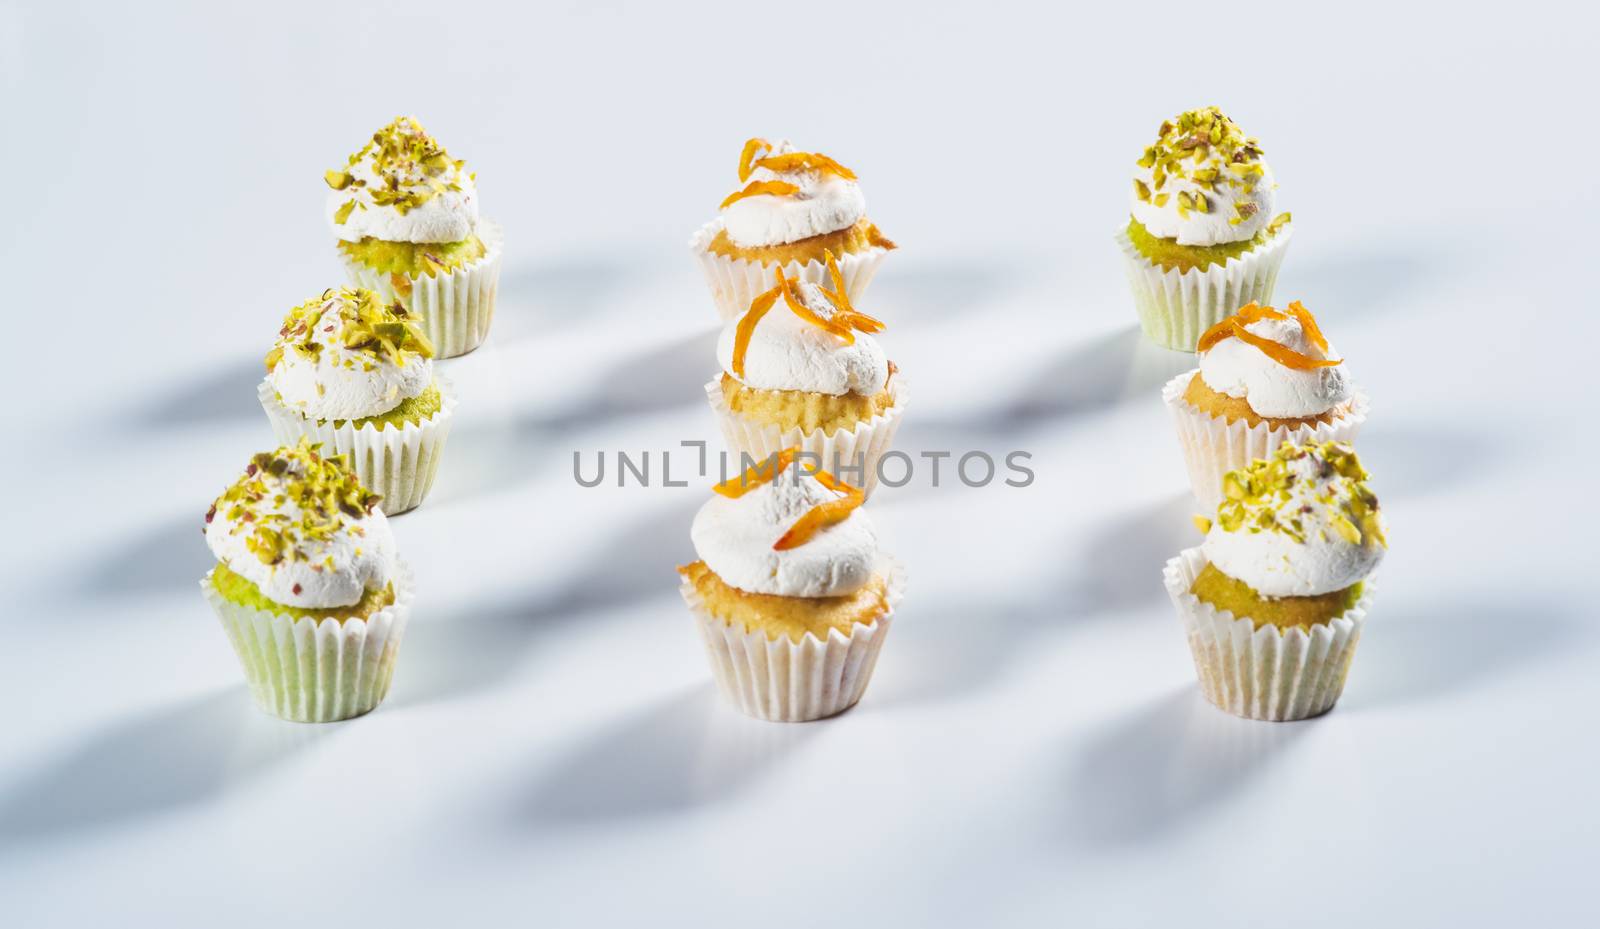 Lots small muffins with meringue on the top by kzen